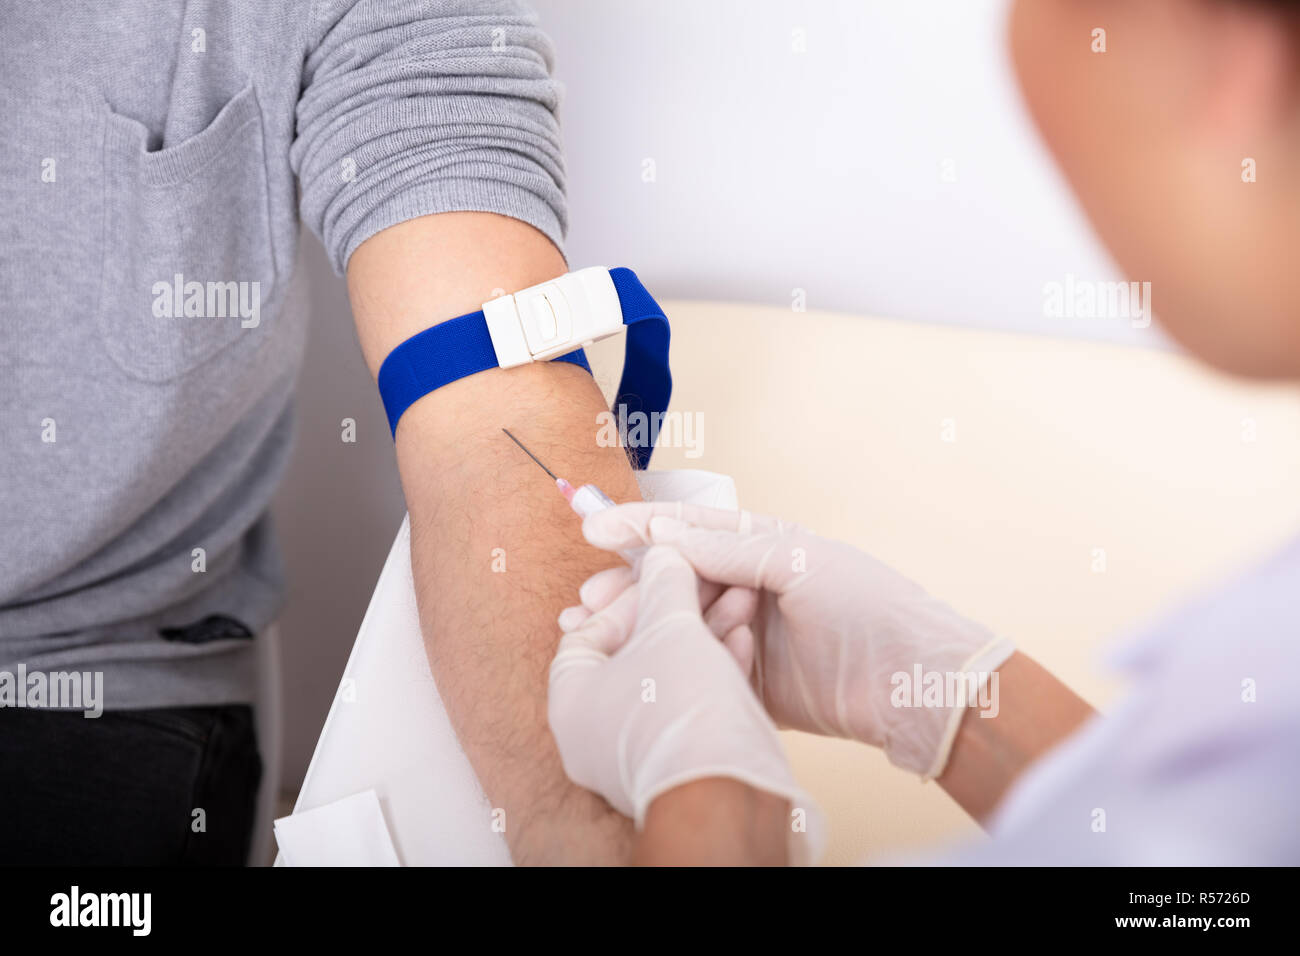 Close-up Of Doctor Injecting Syringe In Patient's Arm To Collect Blood Sample Stock Photo